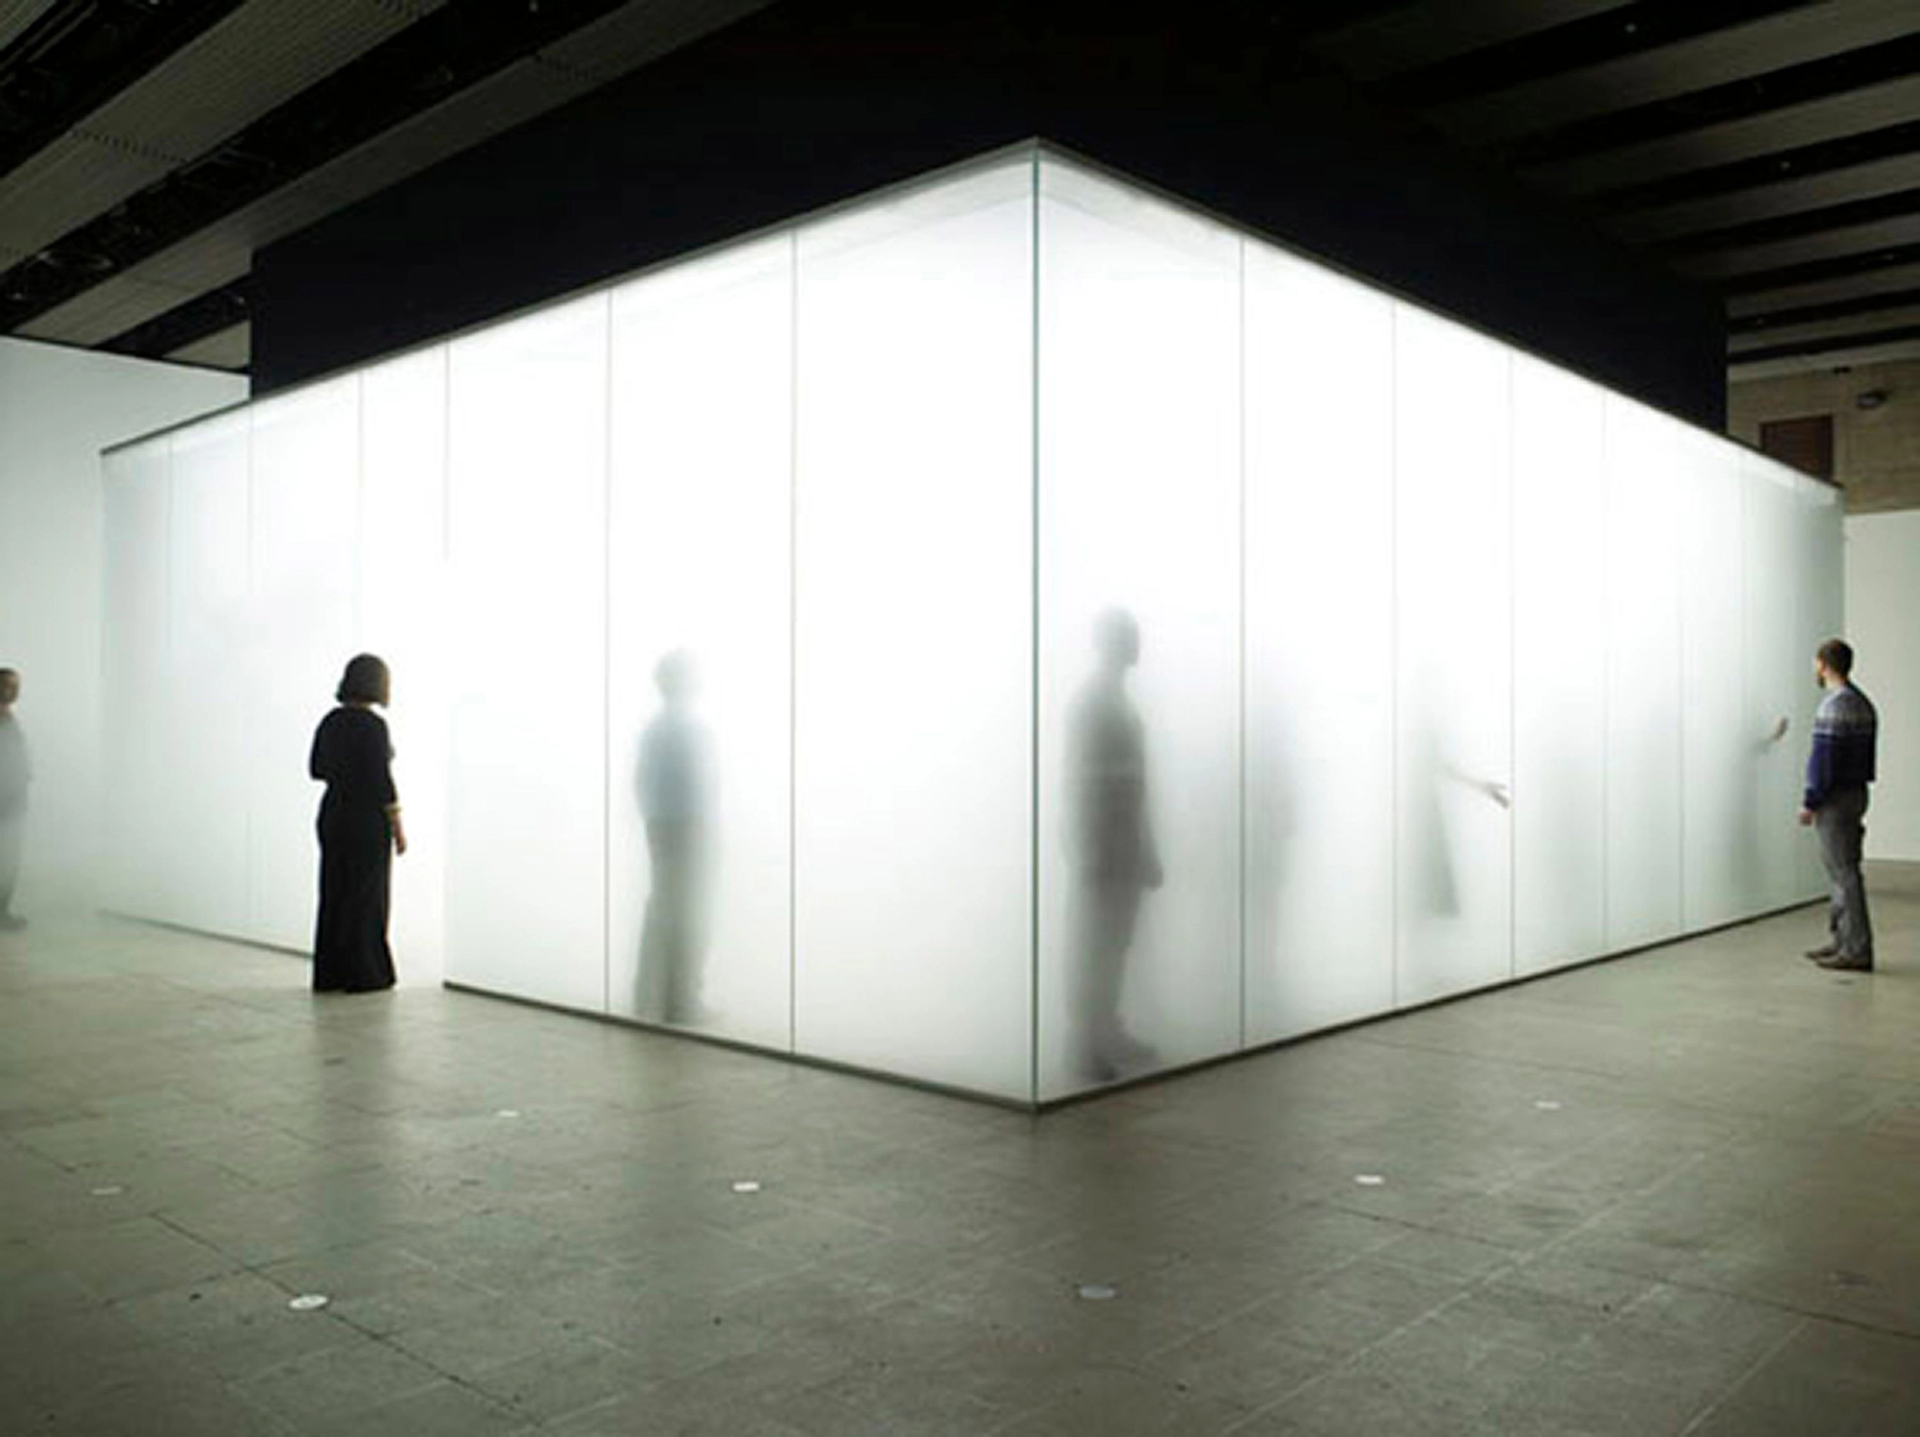 This photograph shows people within a large bright glass box filled with mist. Other people stand outside the box and observe.